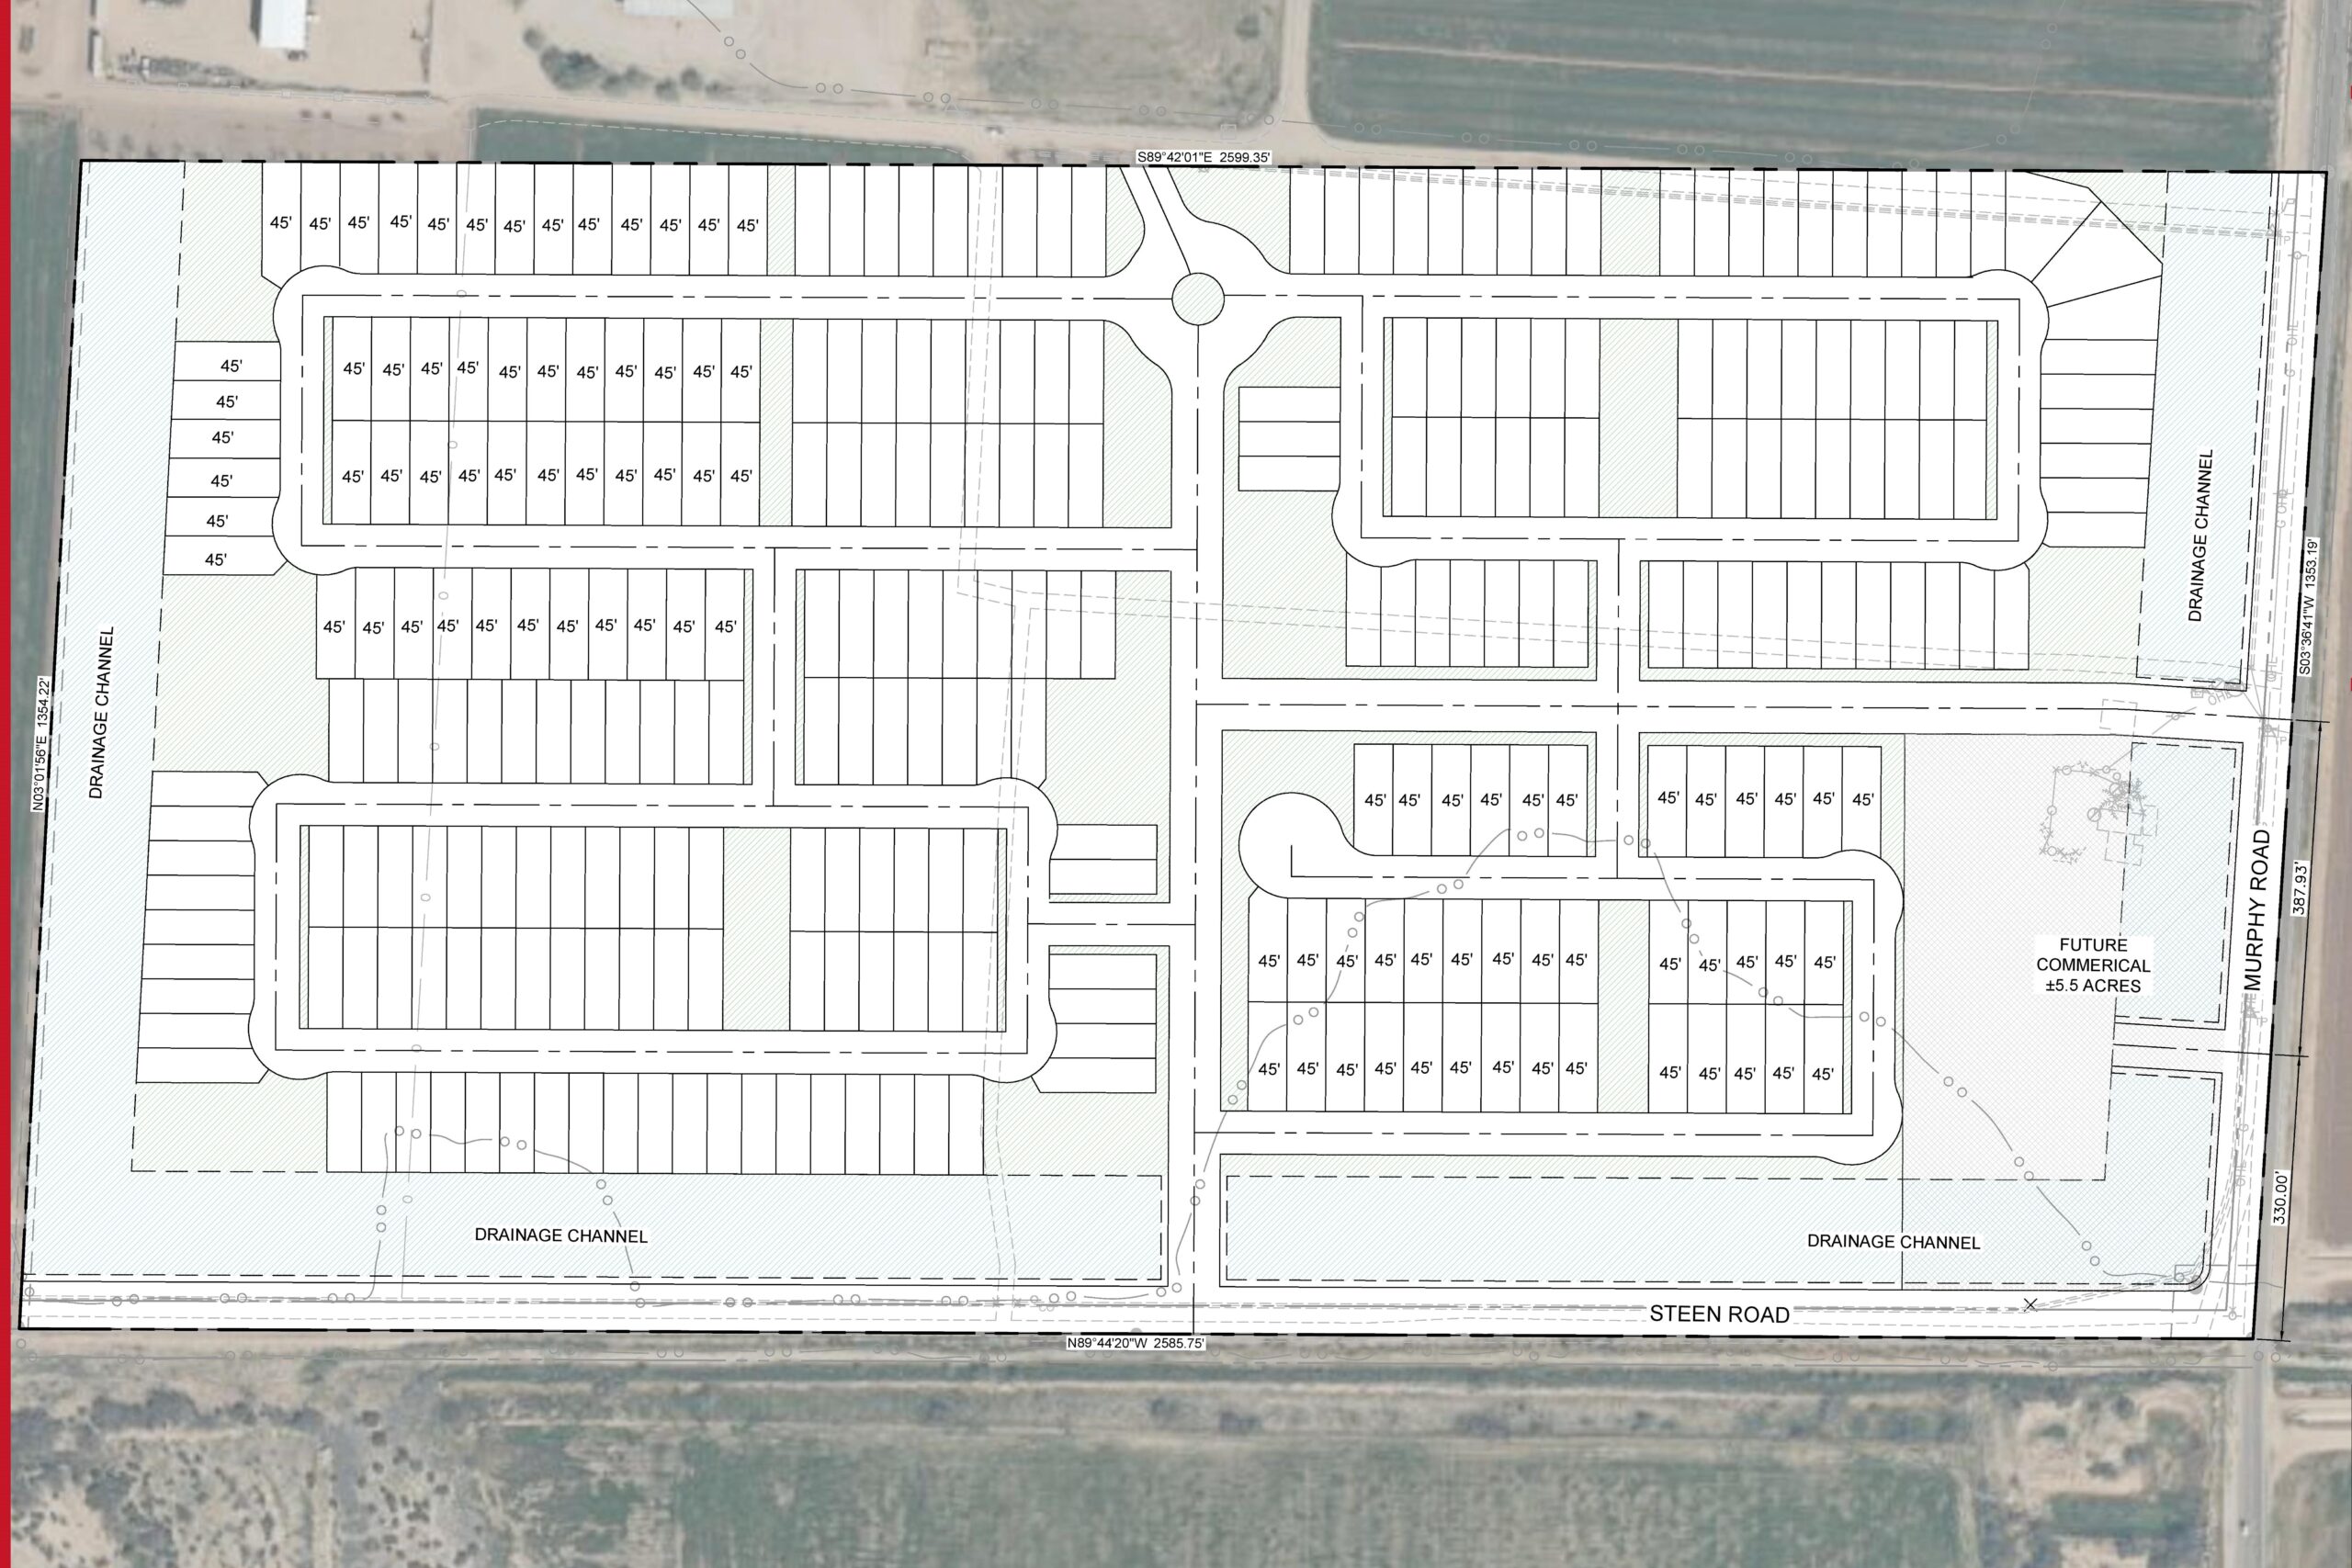 Pecan Grove Land Use Map Cropped